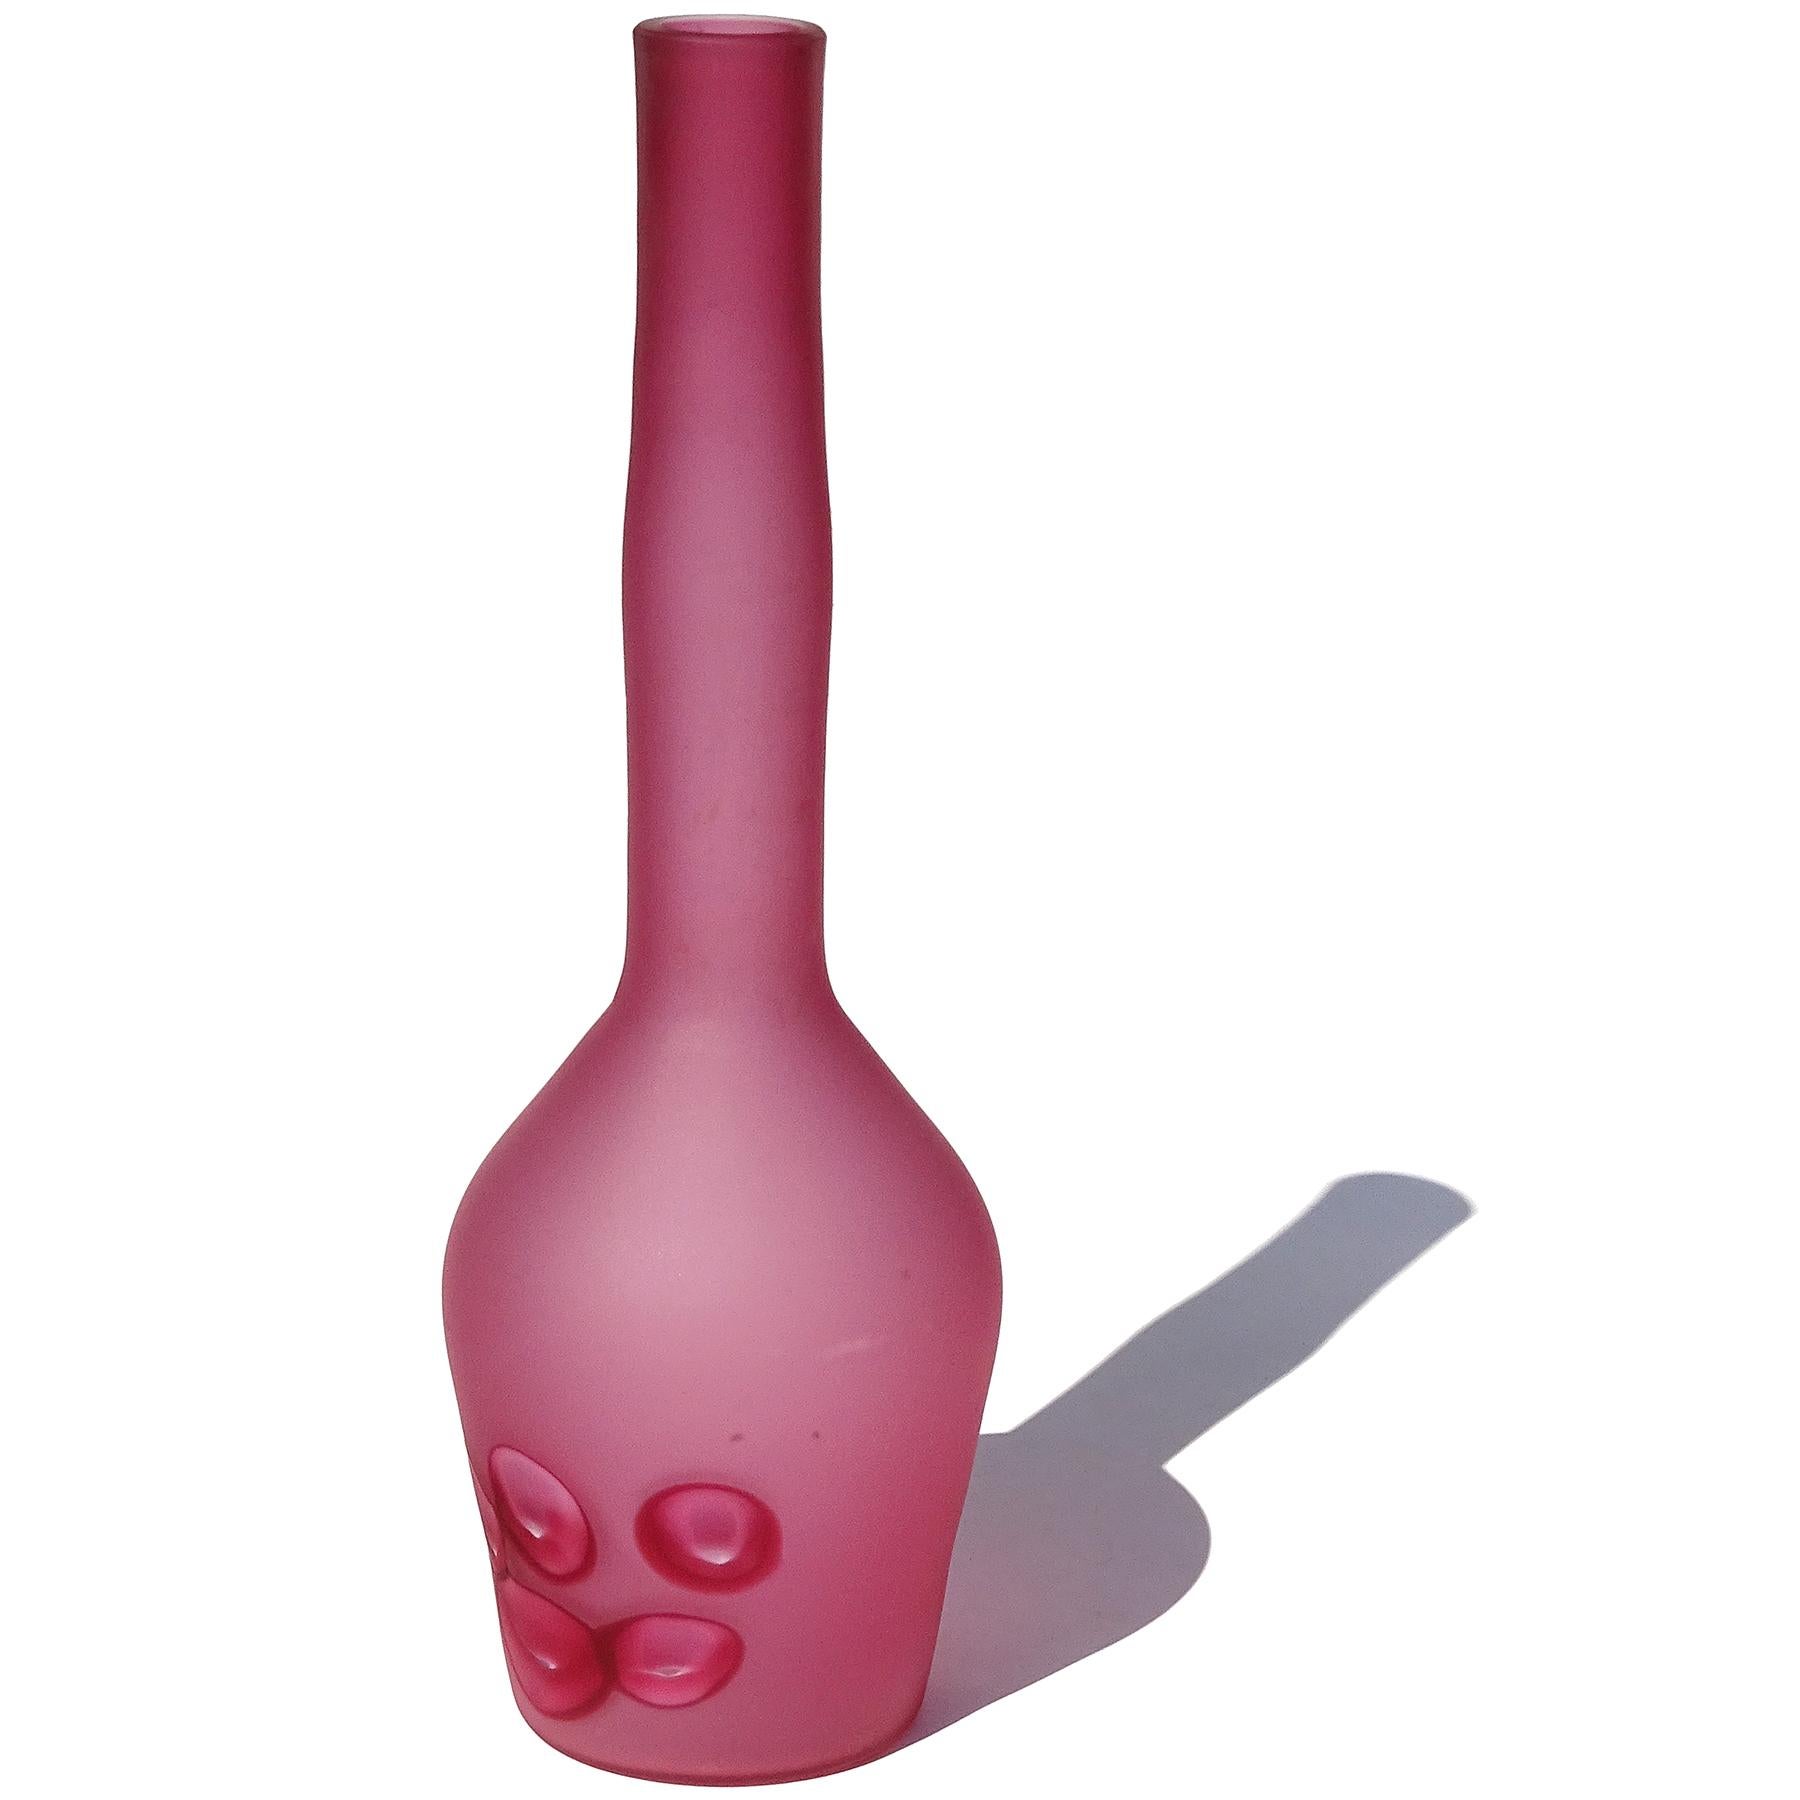 Beautiful and rare, vintage Murano hand blown dark pink satin surface and cut murrines Italian art glass flower vase / bottle. Documented to designer Ermanno Toso, for the Fratelli Toso company. The vase is created in the 